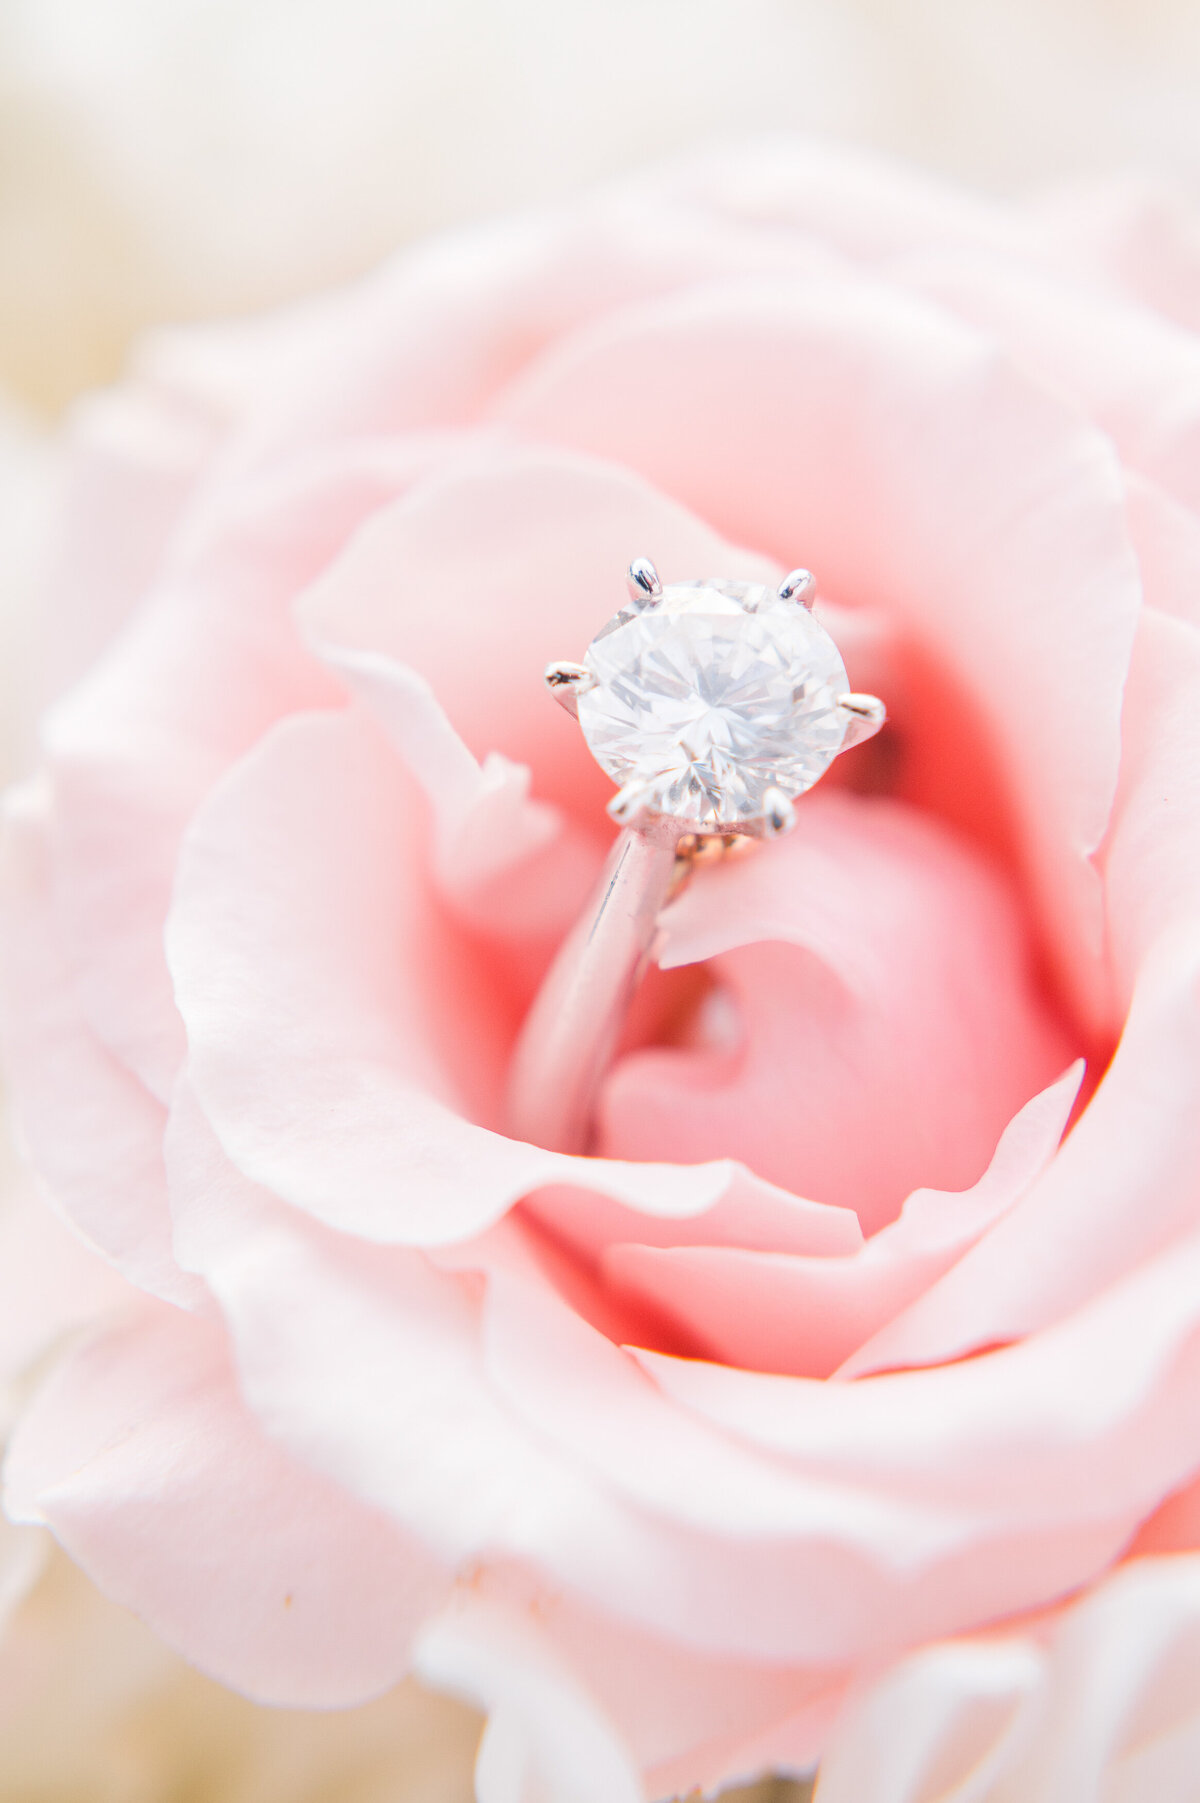 An white diamond engagement ring photographed inside a light pink rose.